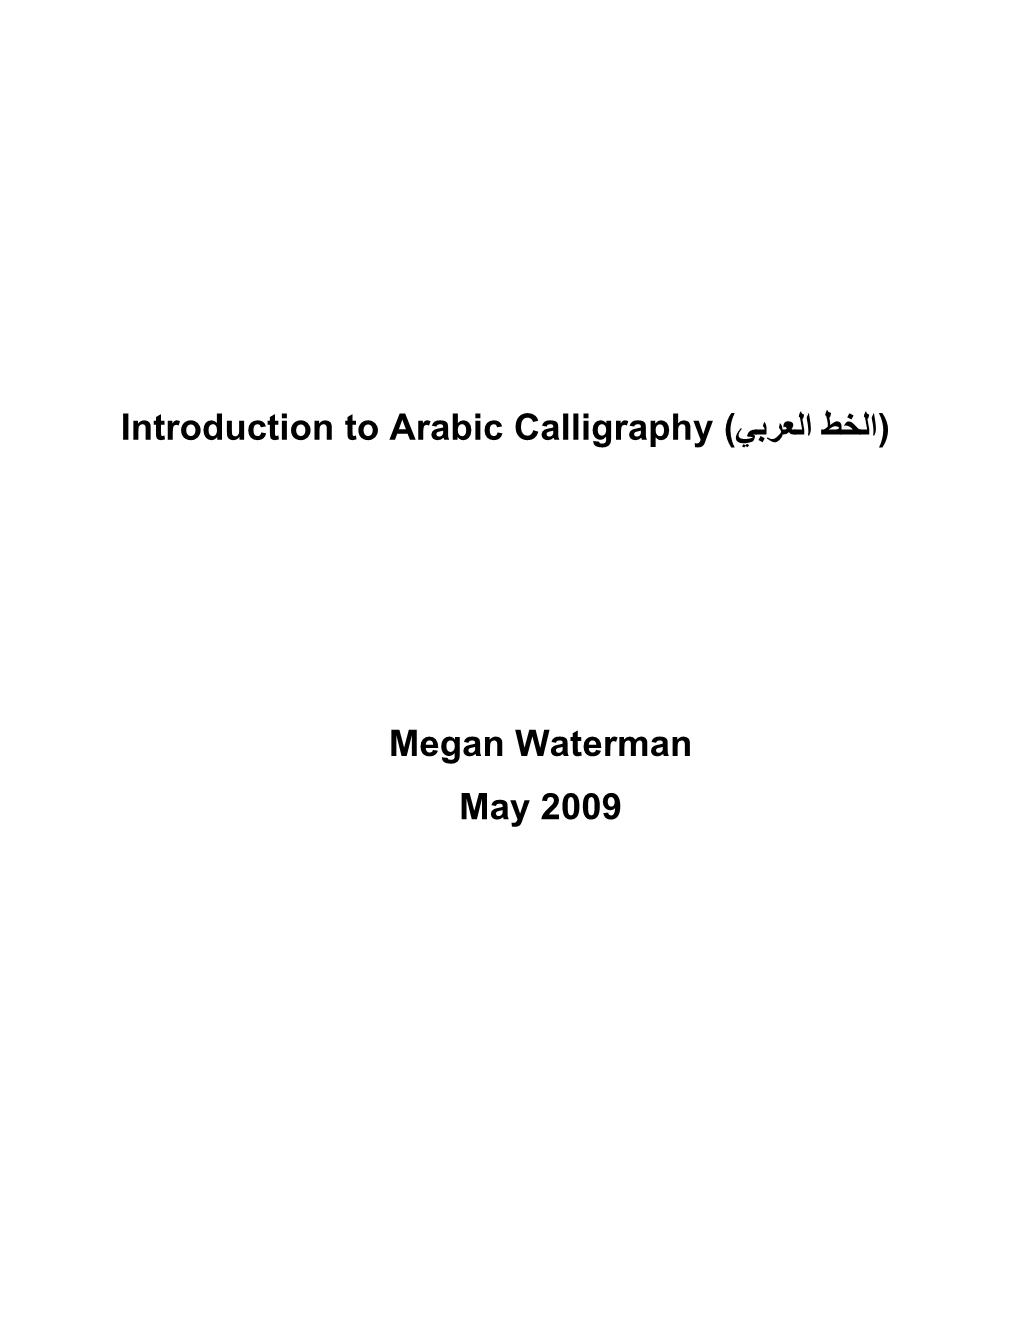 Introduction to Arabic Calligraphy